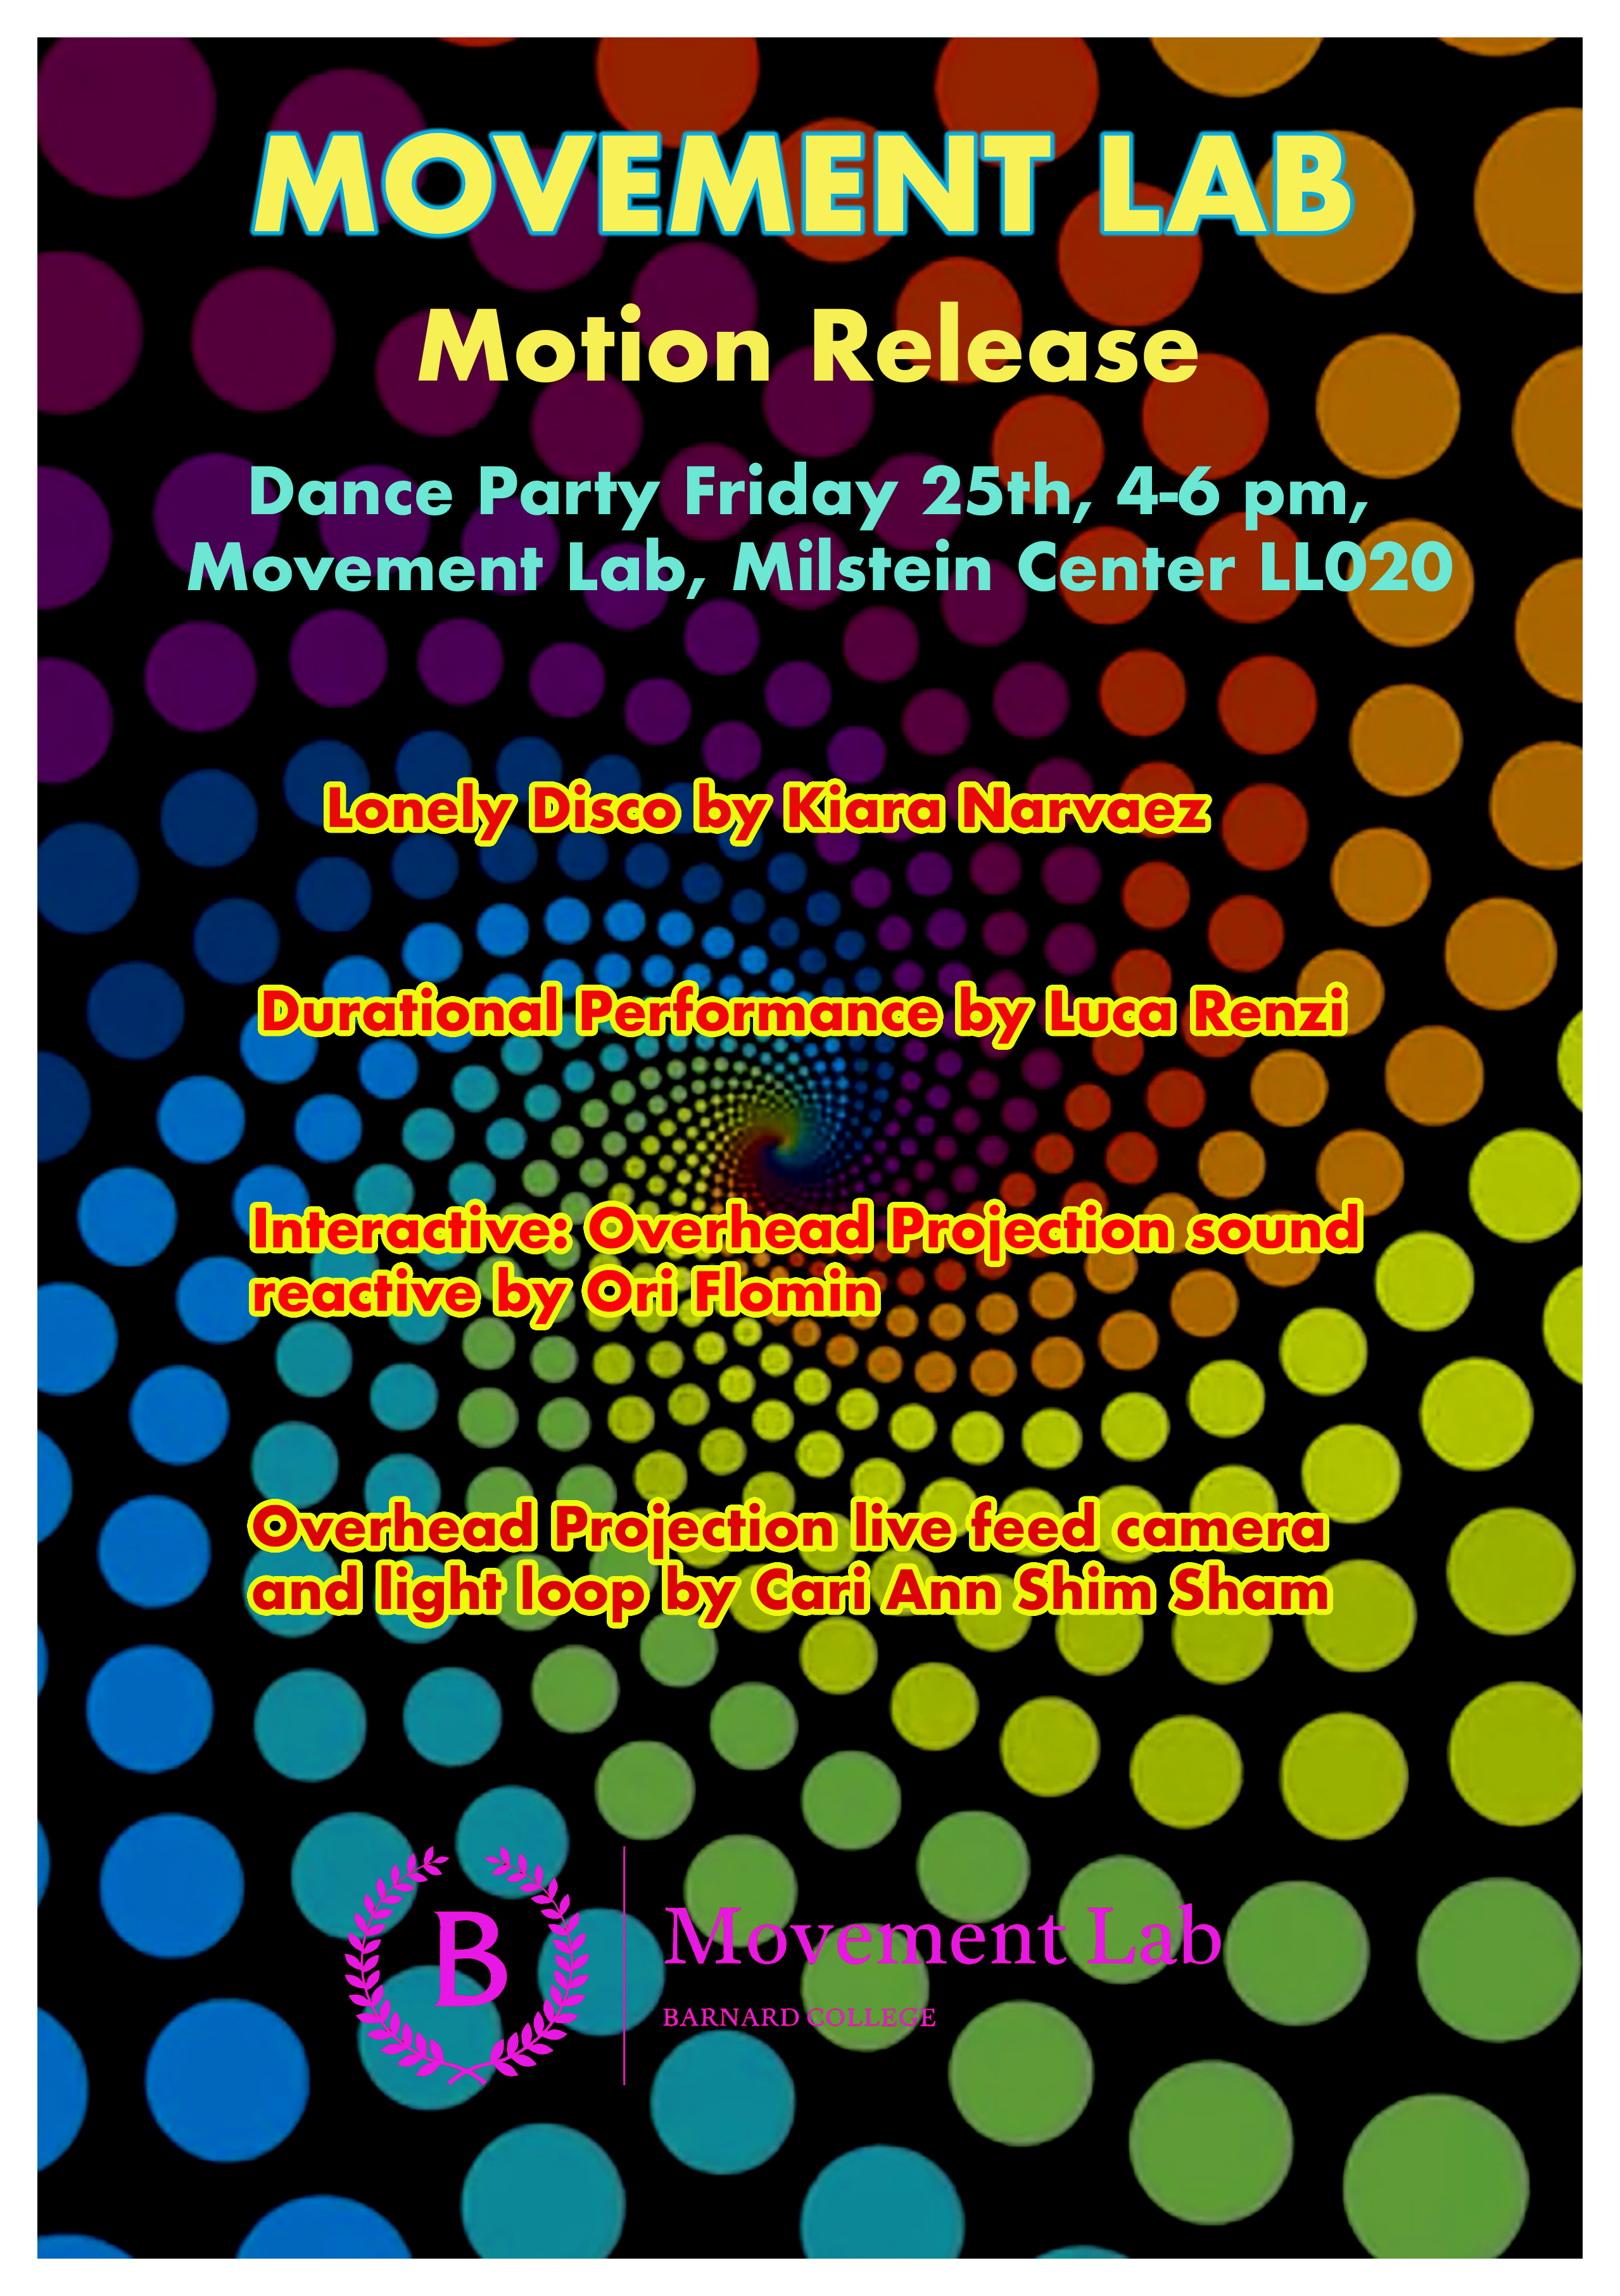 Poster for Motion Release Jam with description and date/time information.